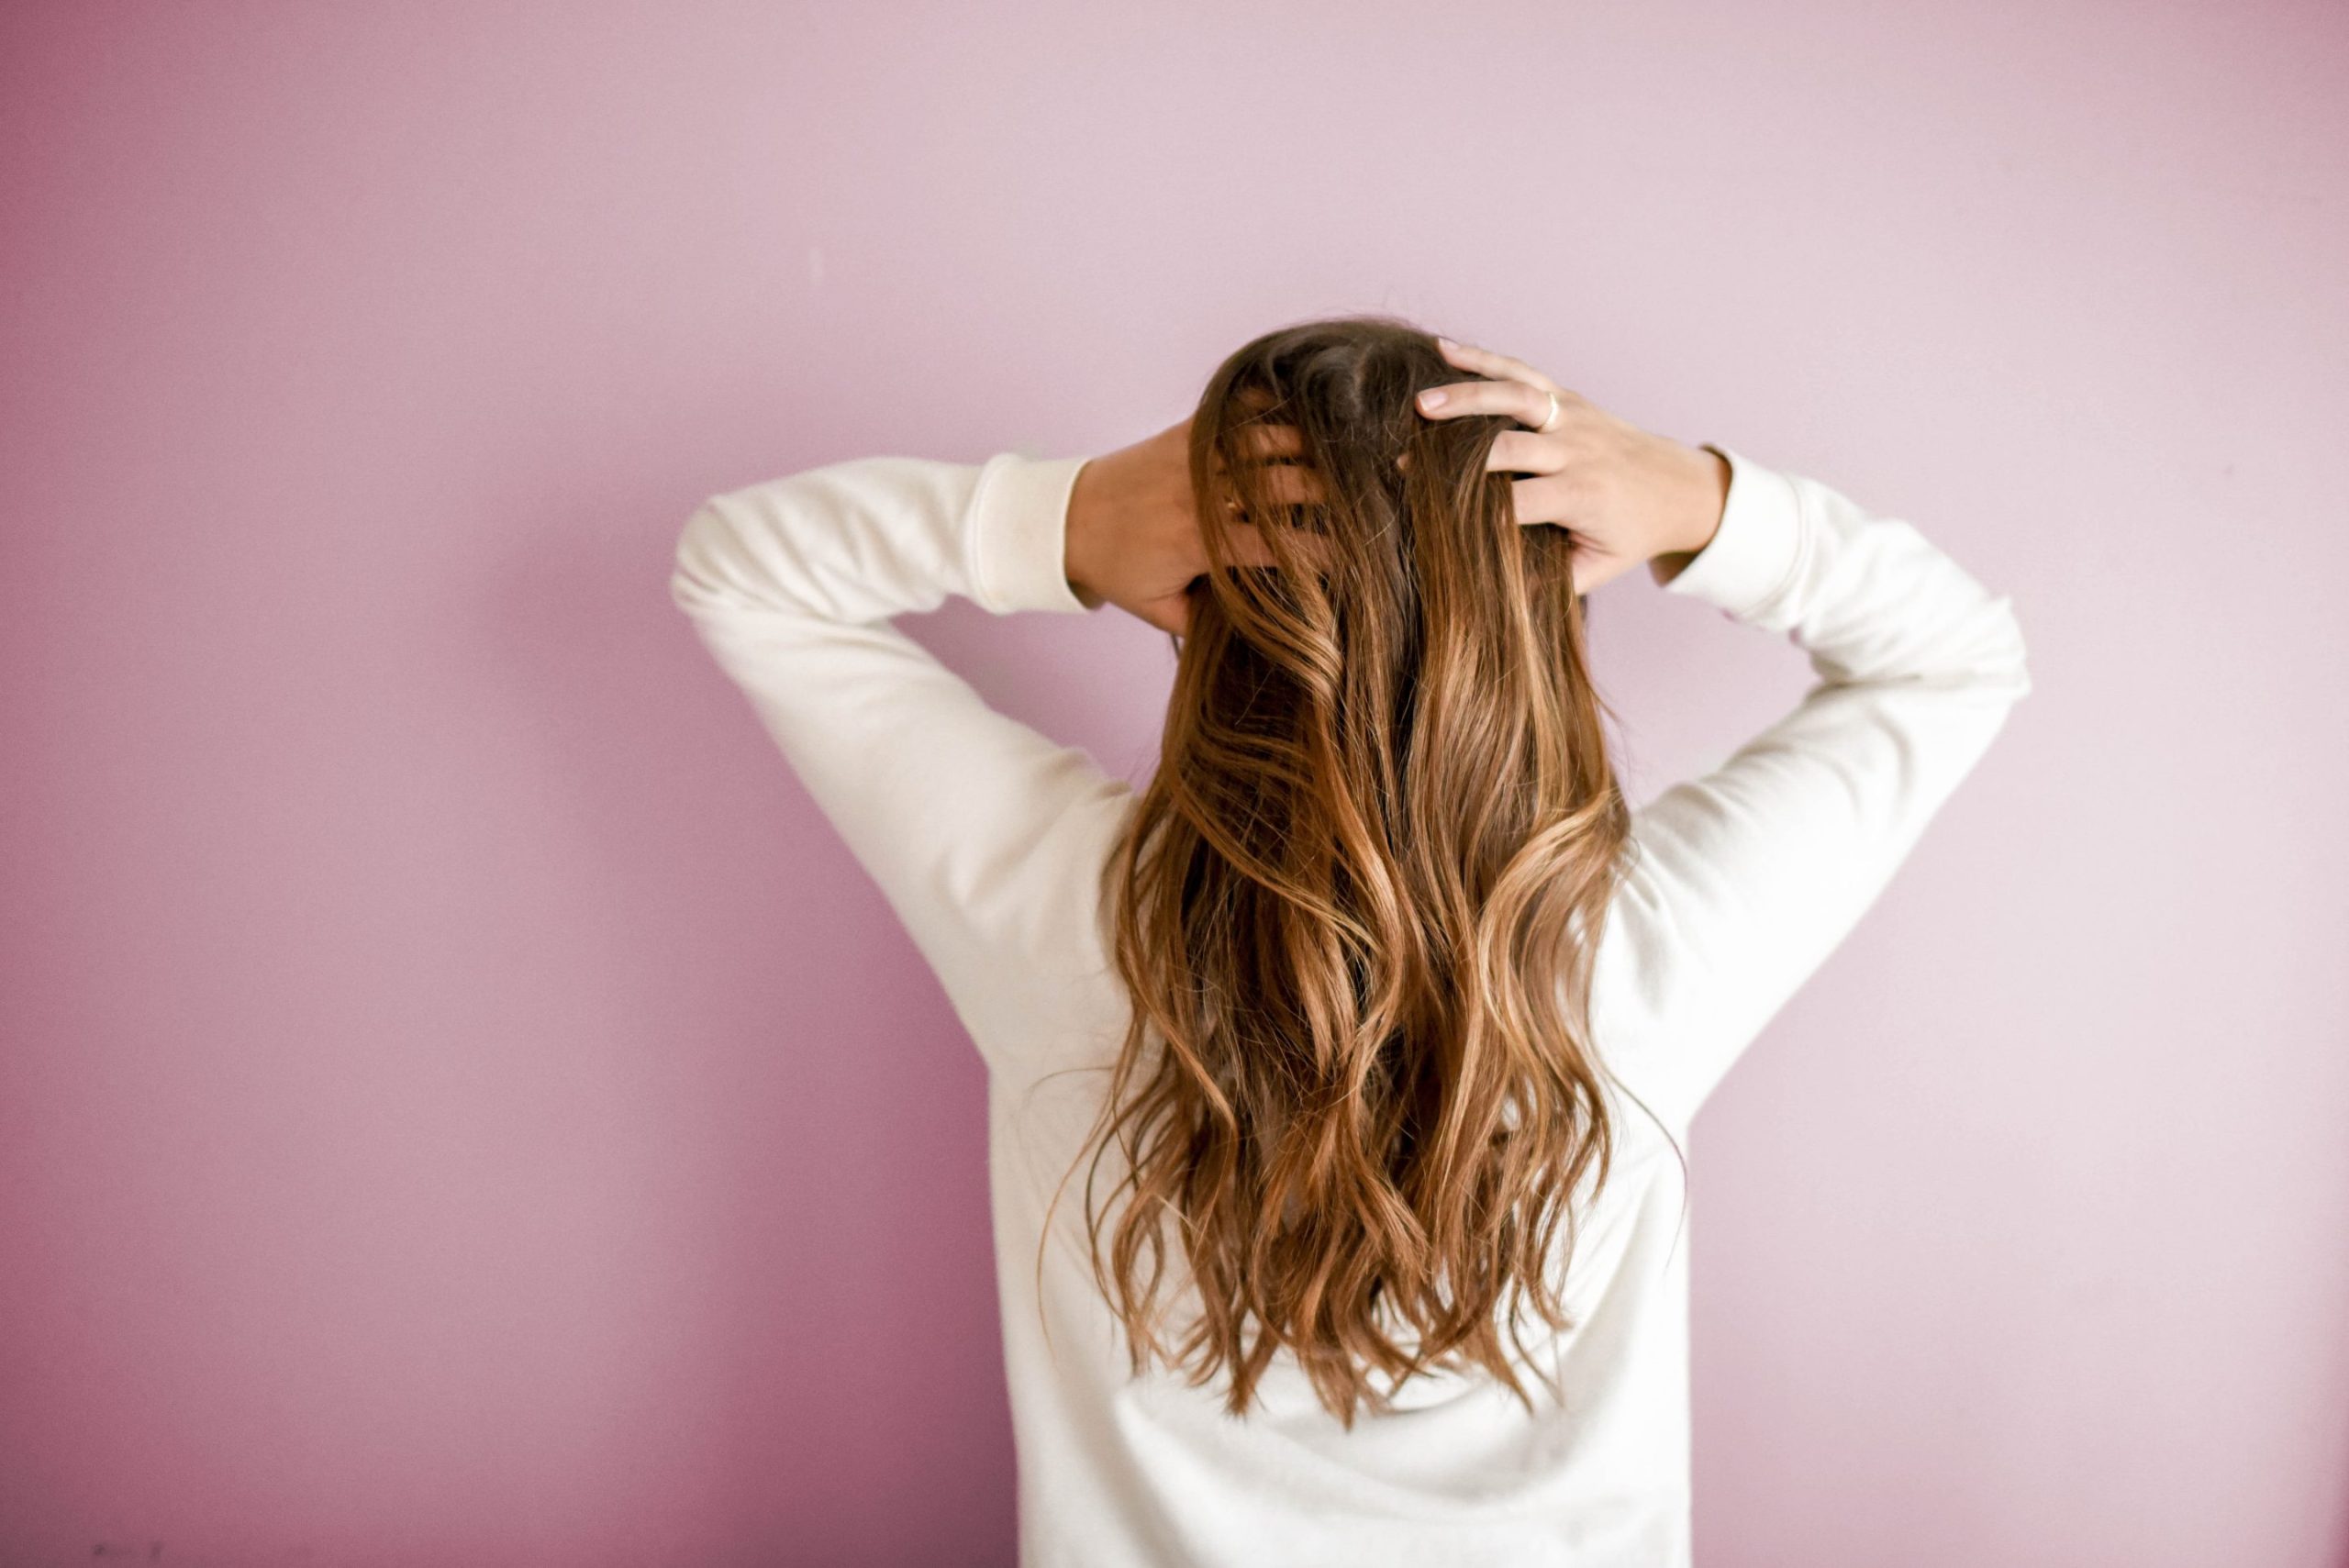 Woman touching her hair, which may be turning gray